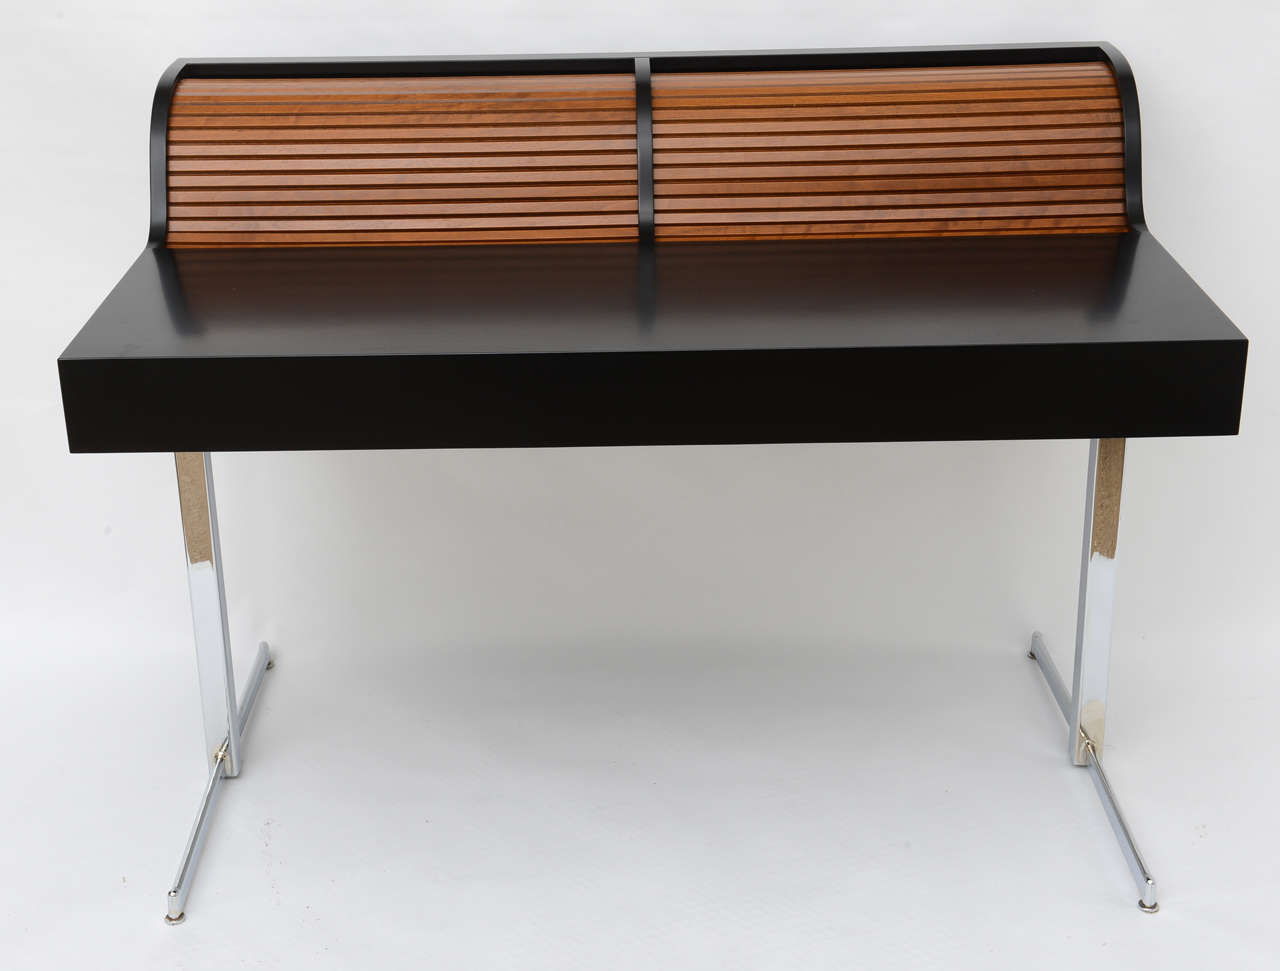 Fantastic black laminate desk with natural channeled roll tops, side by side, and nickel over steel legs. This iconic design began with Herman Miller and this desk is a family member from the period.
Measures 28.5